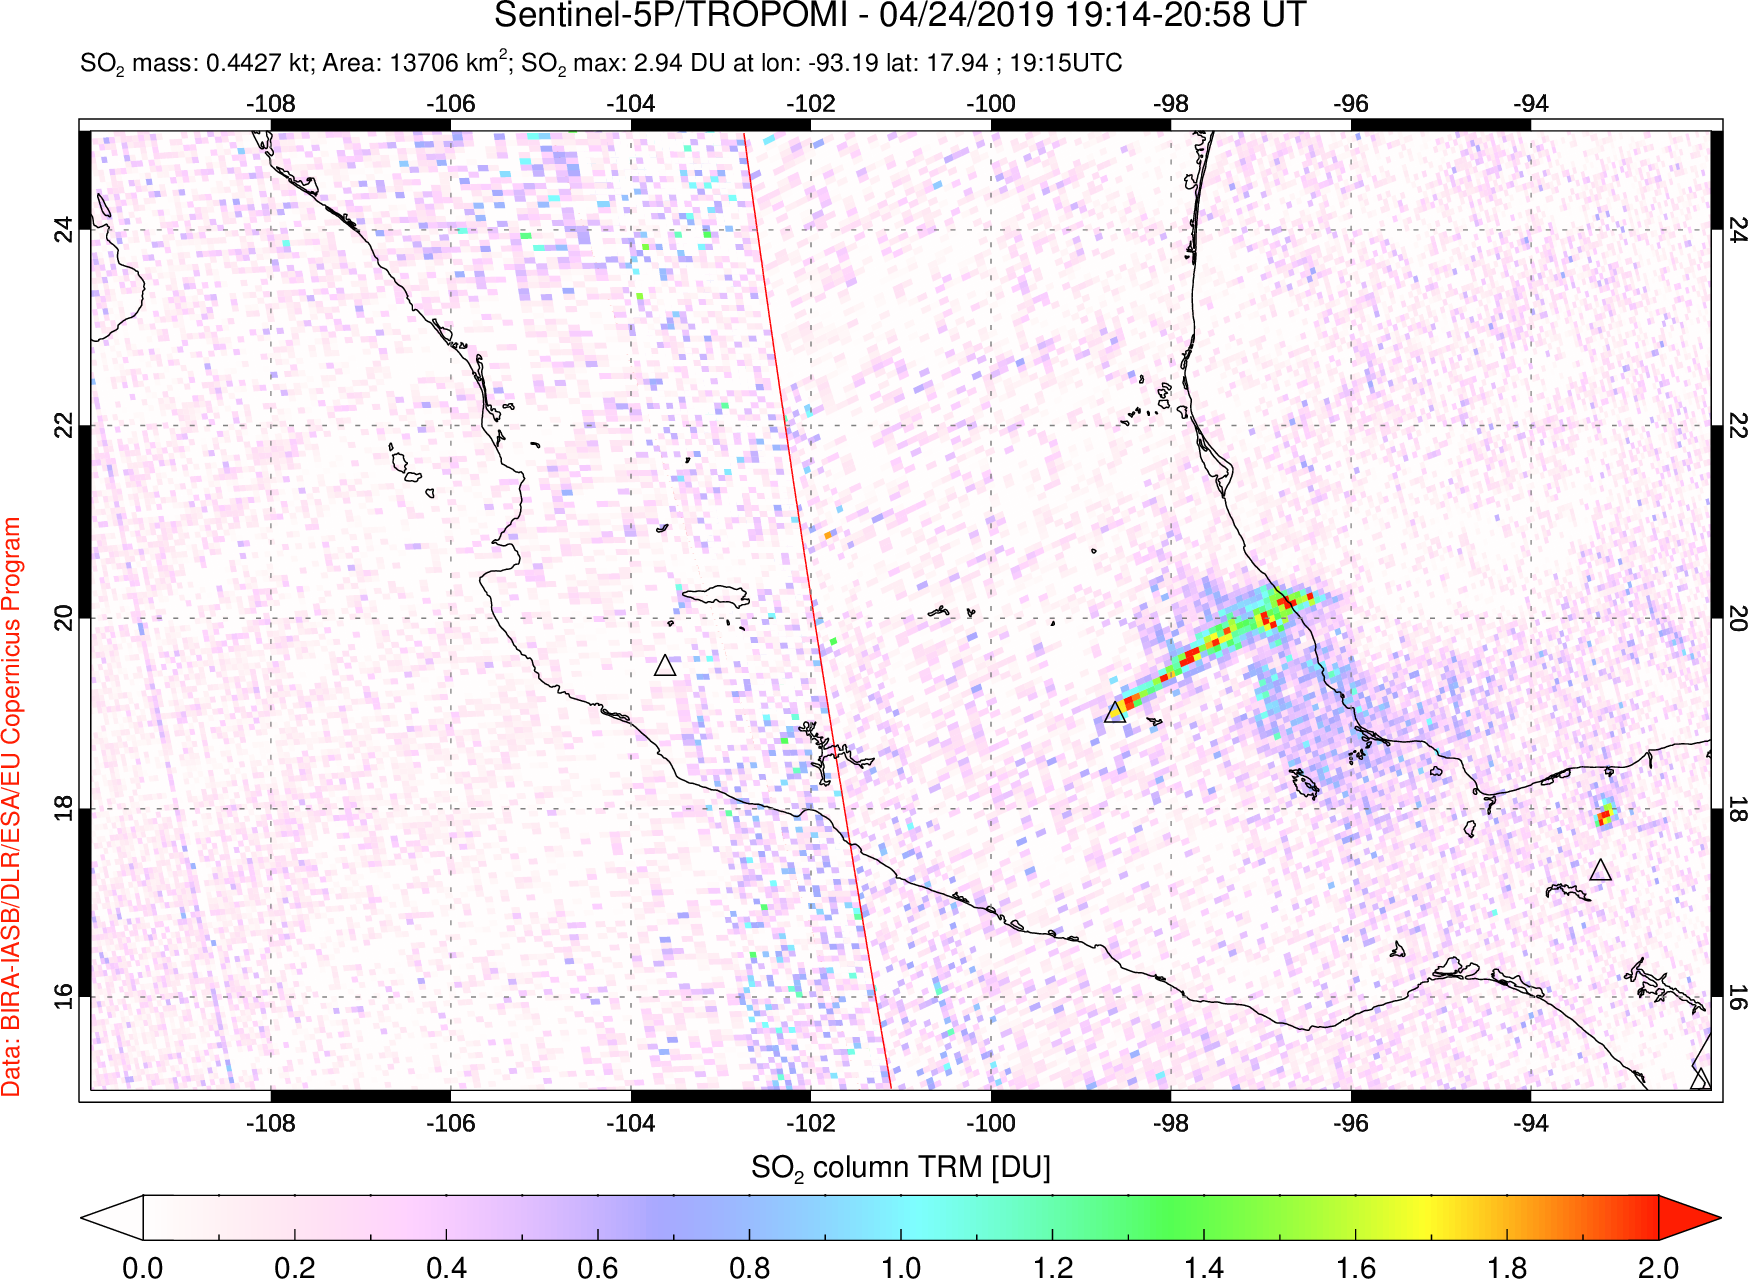 A sulfur dioxide image over Mexico on Apr 24, 2019.